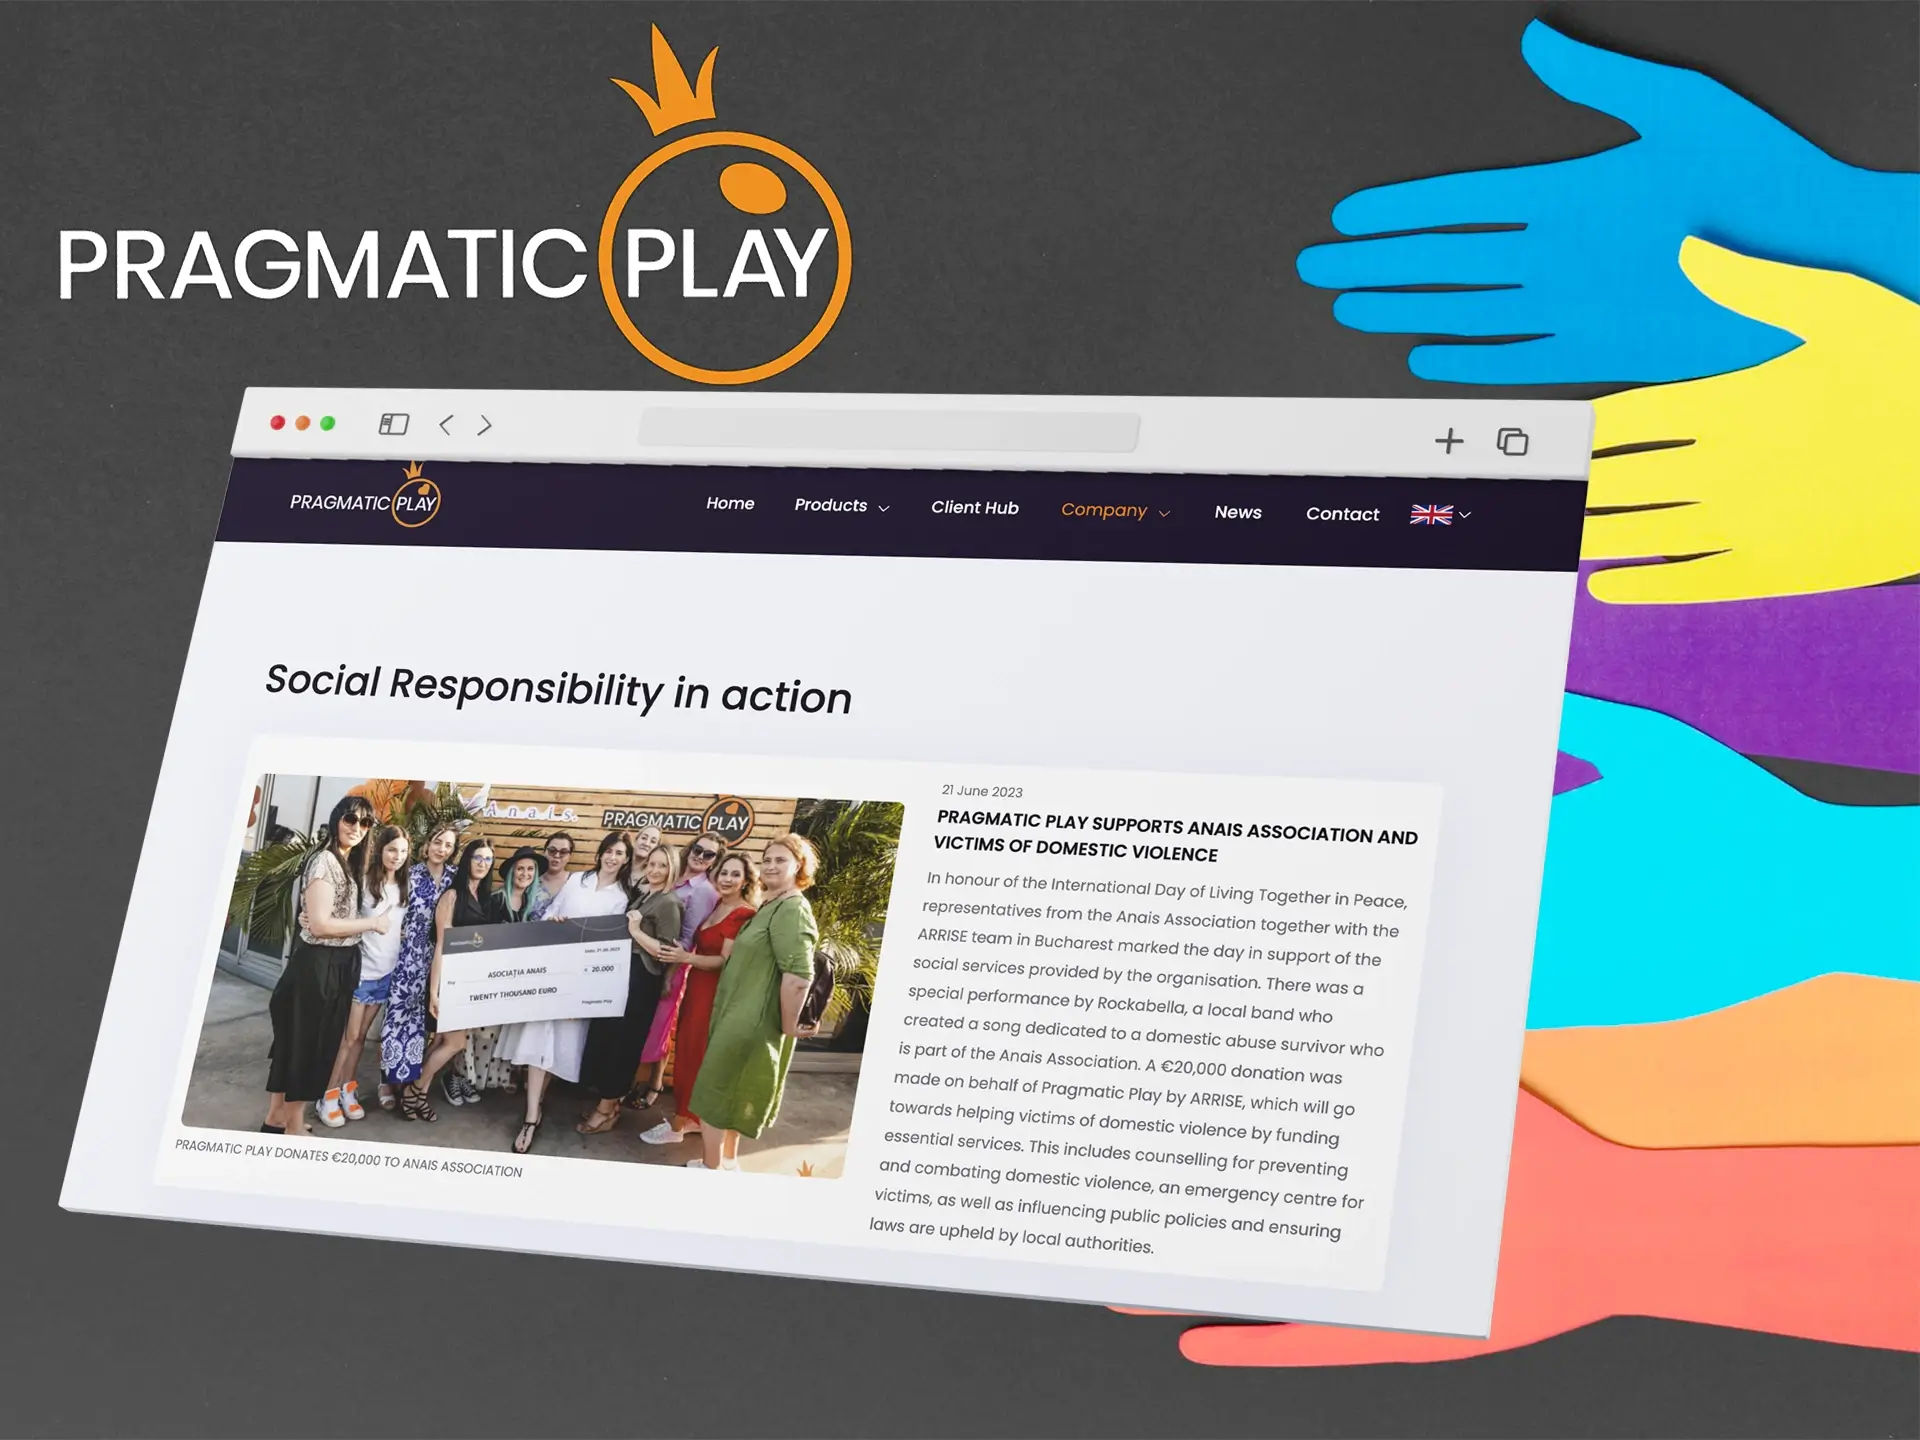 The Pragmatic Play company supports and donates money to associations.